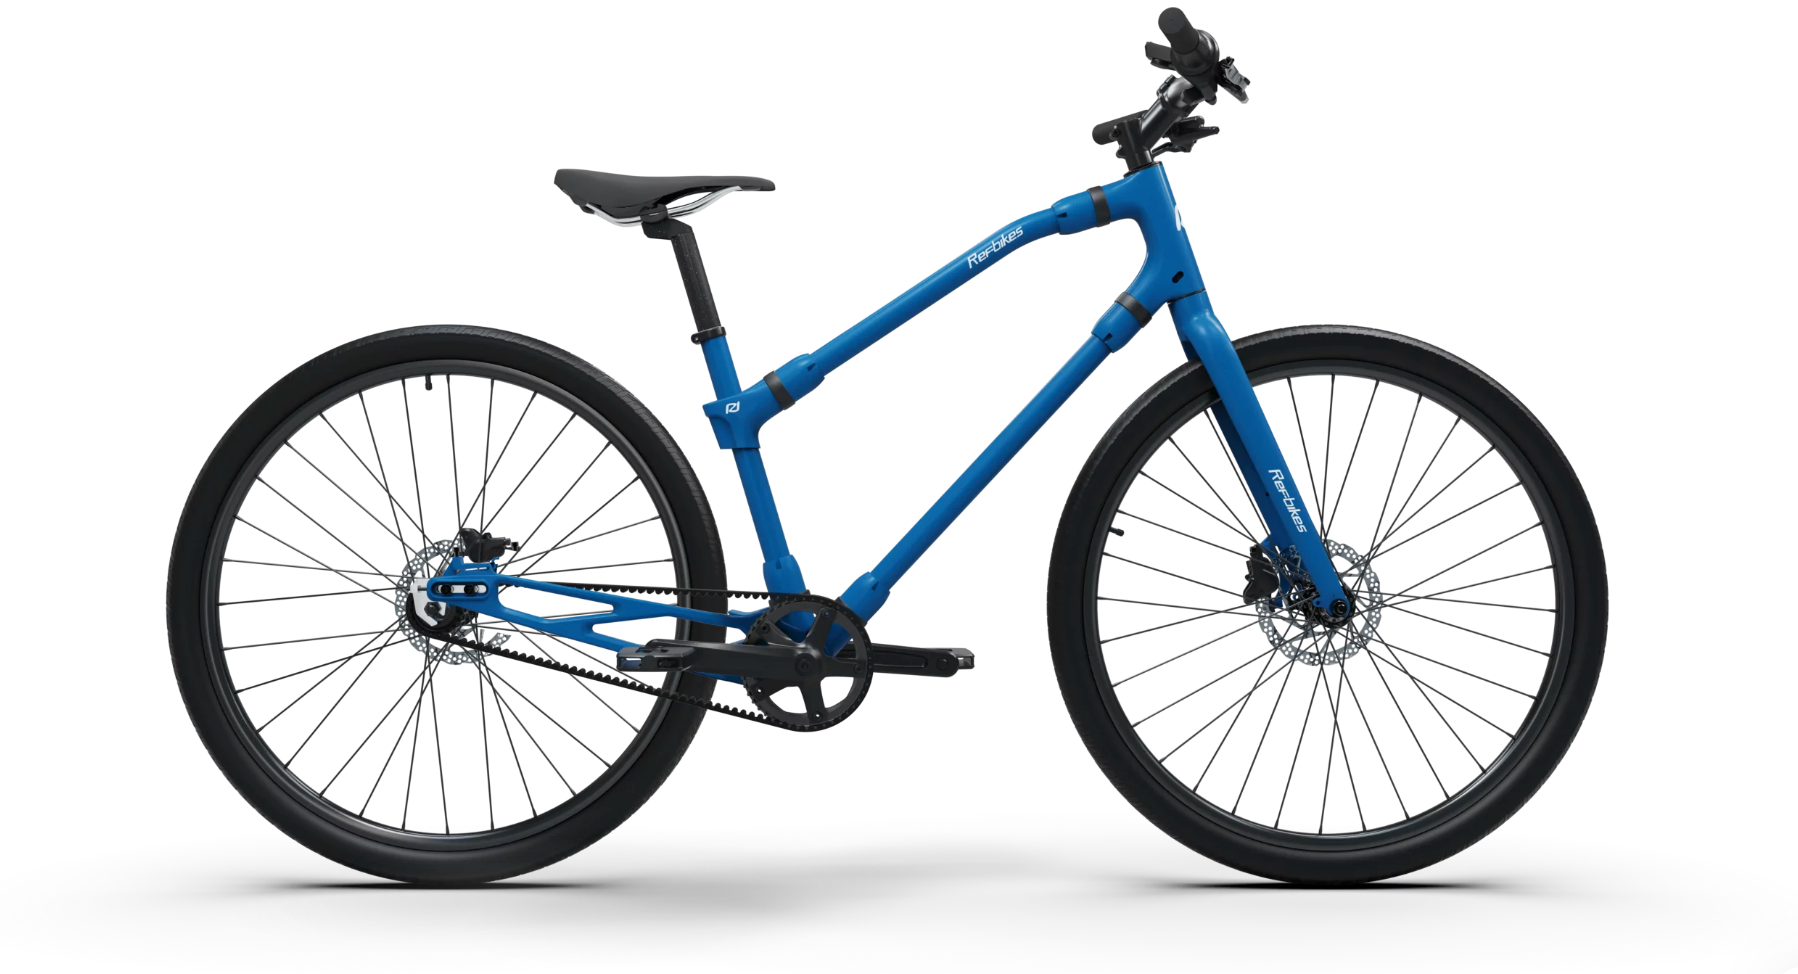 Bold blue Ref Essential bike side view, featuring a durable frame and efficient urban mobility.